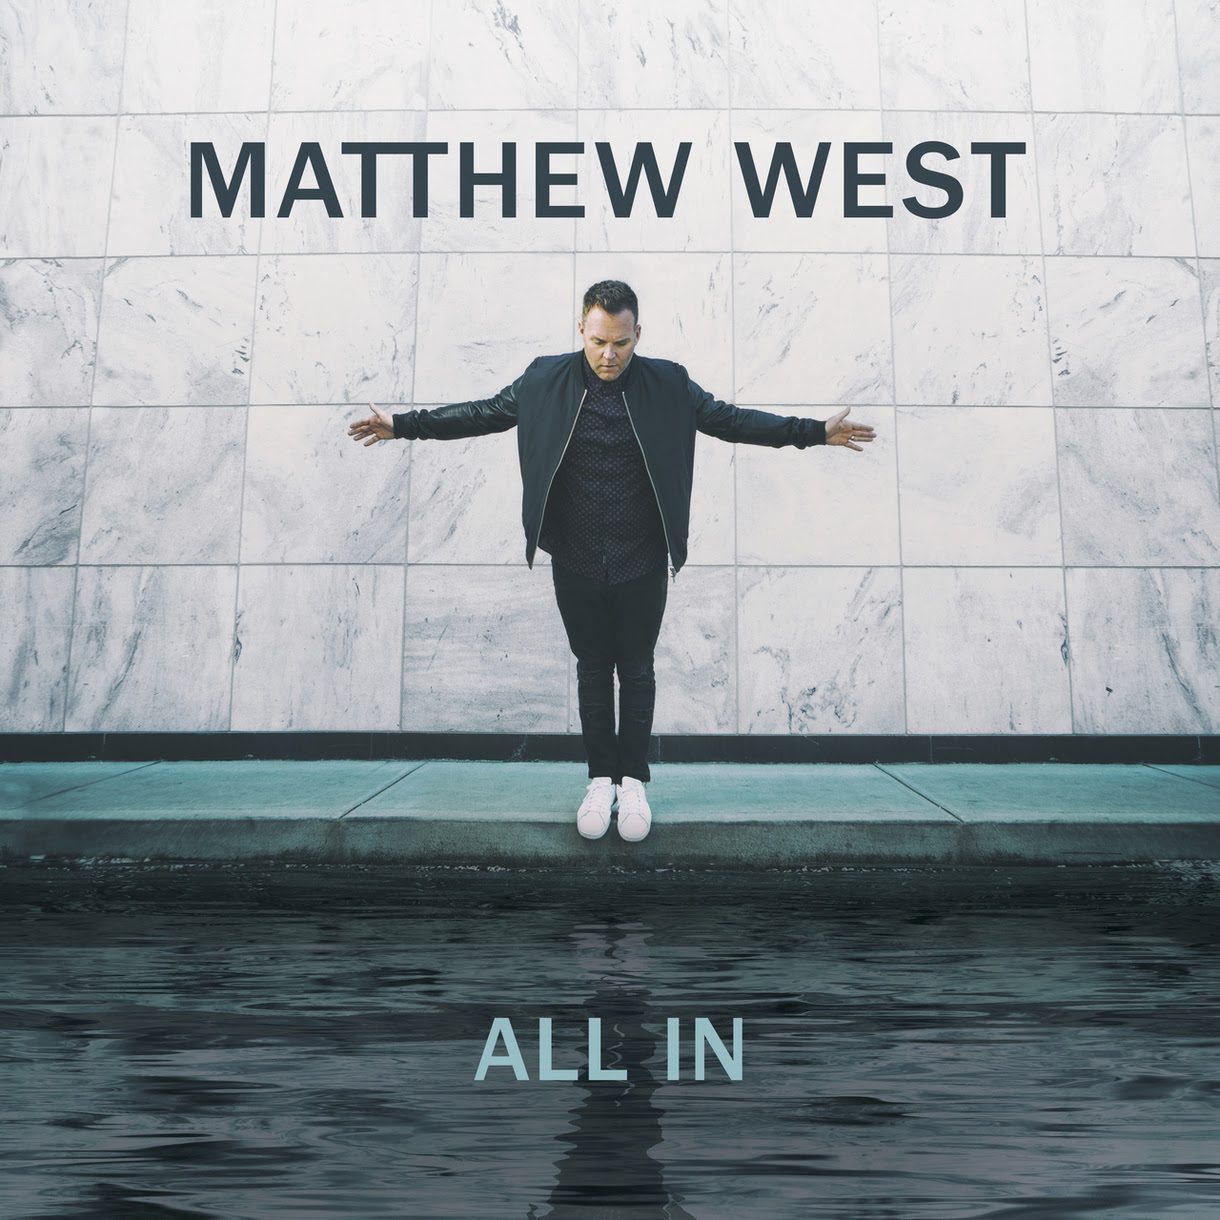 Matthew West releases special version of 'All In' with 5 brandnew